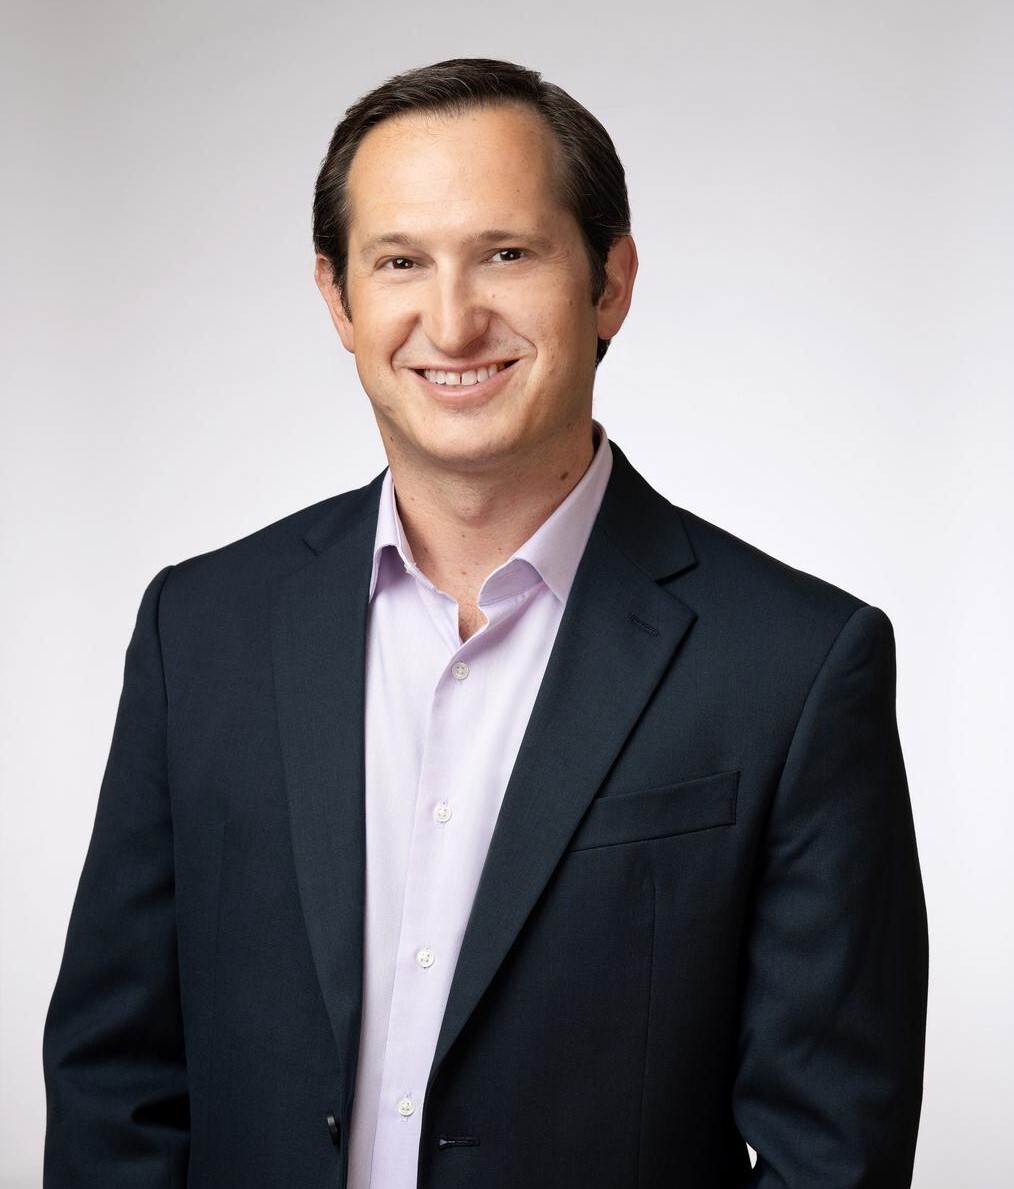 Jason Robins, CEO & Co-Founder, DraftKings